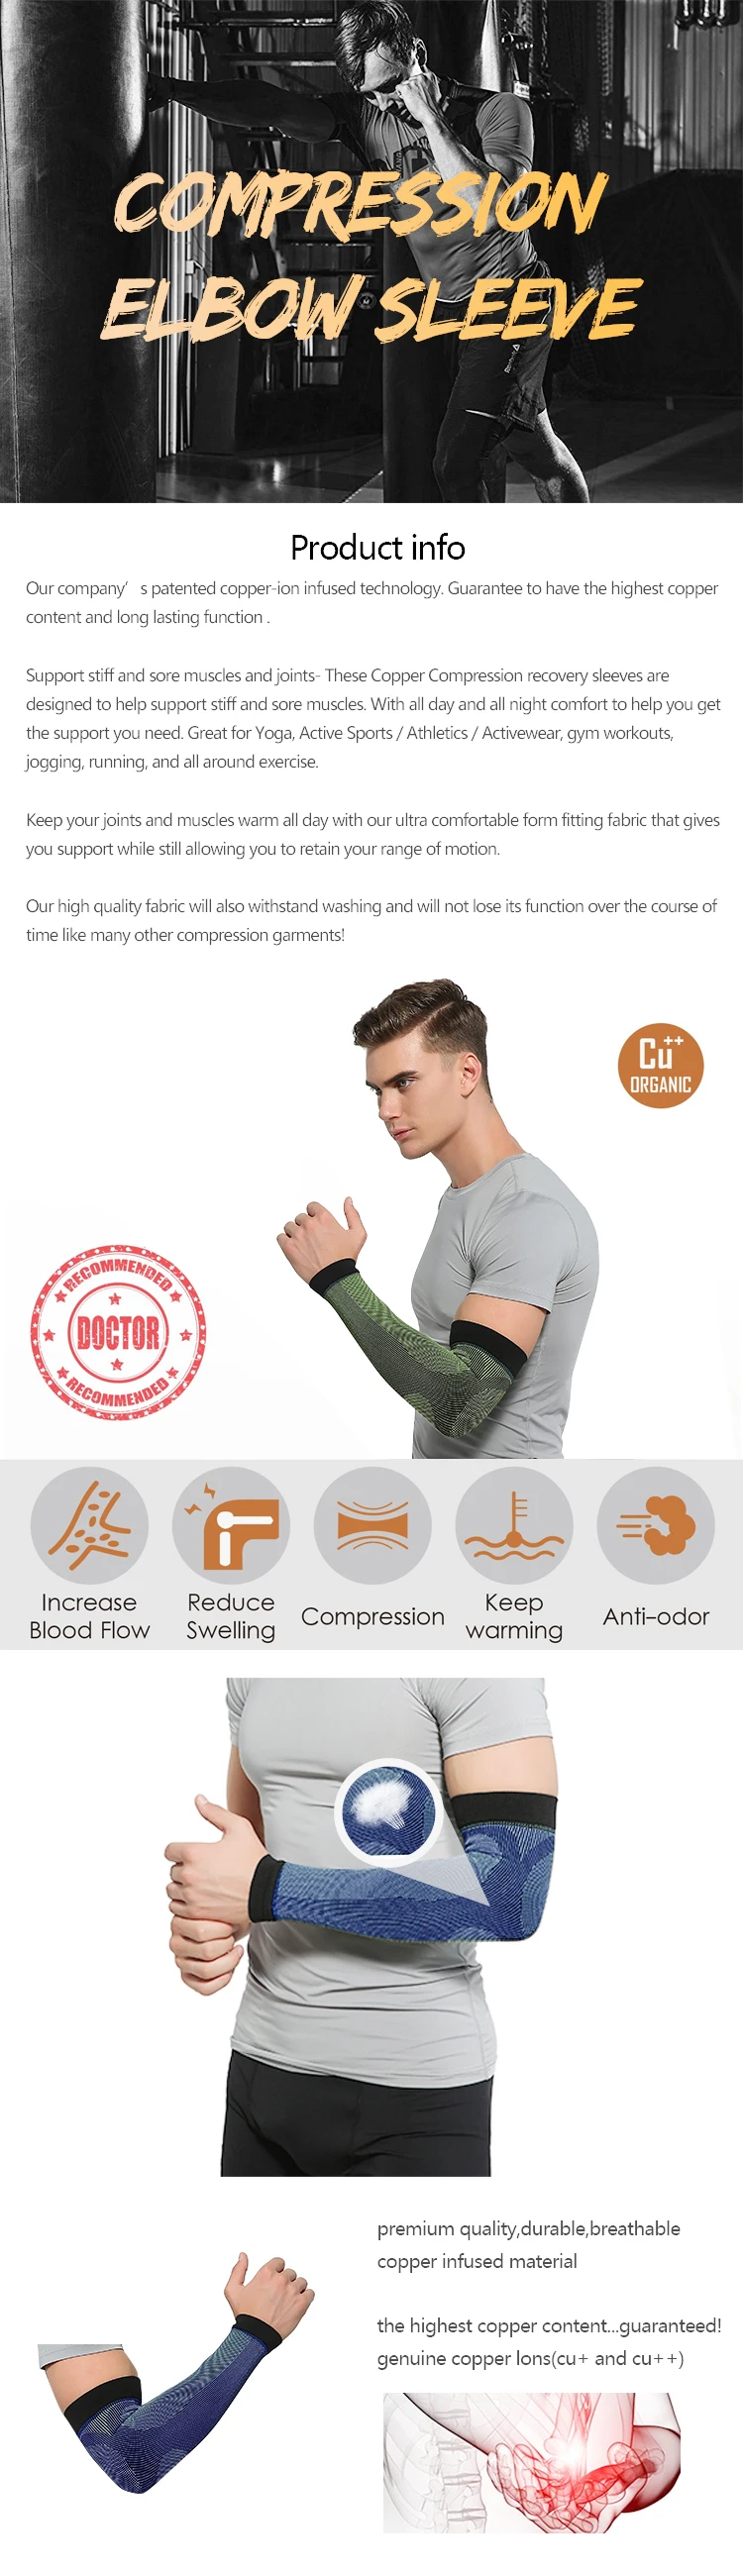 Elbow Support Tennis Elbow Sleeve Elbow Brace Support